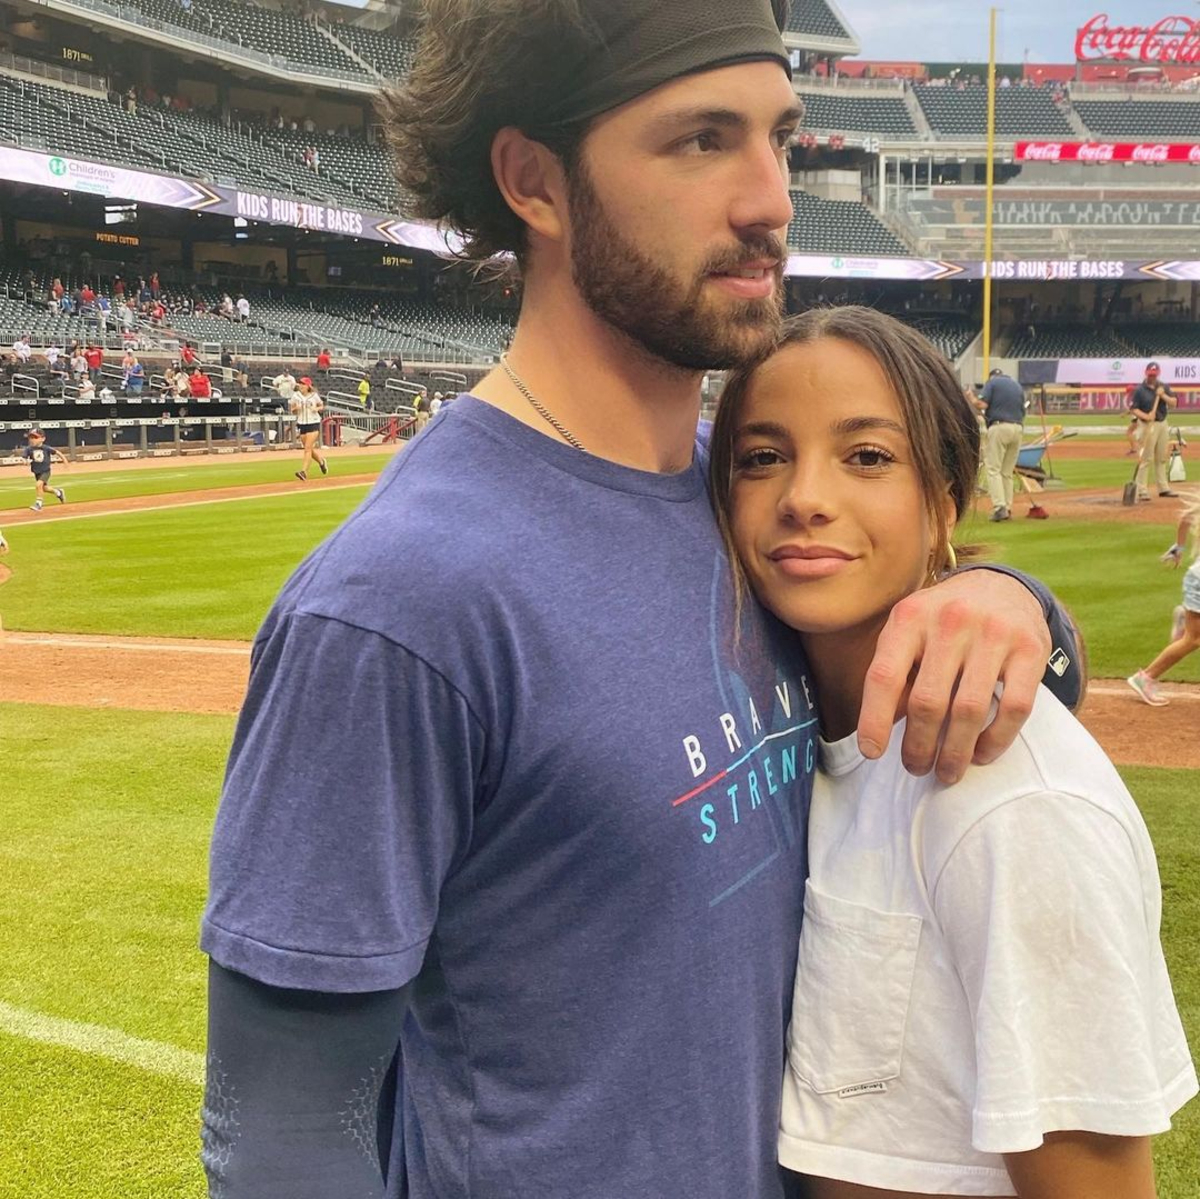 Who is Dansby Swanson's wife, Mallory Pugh?